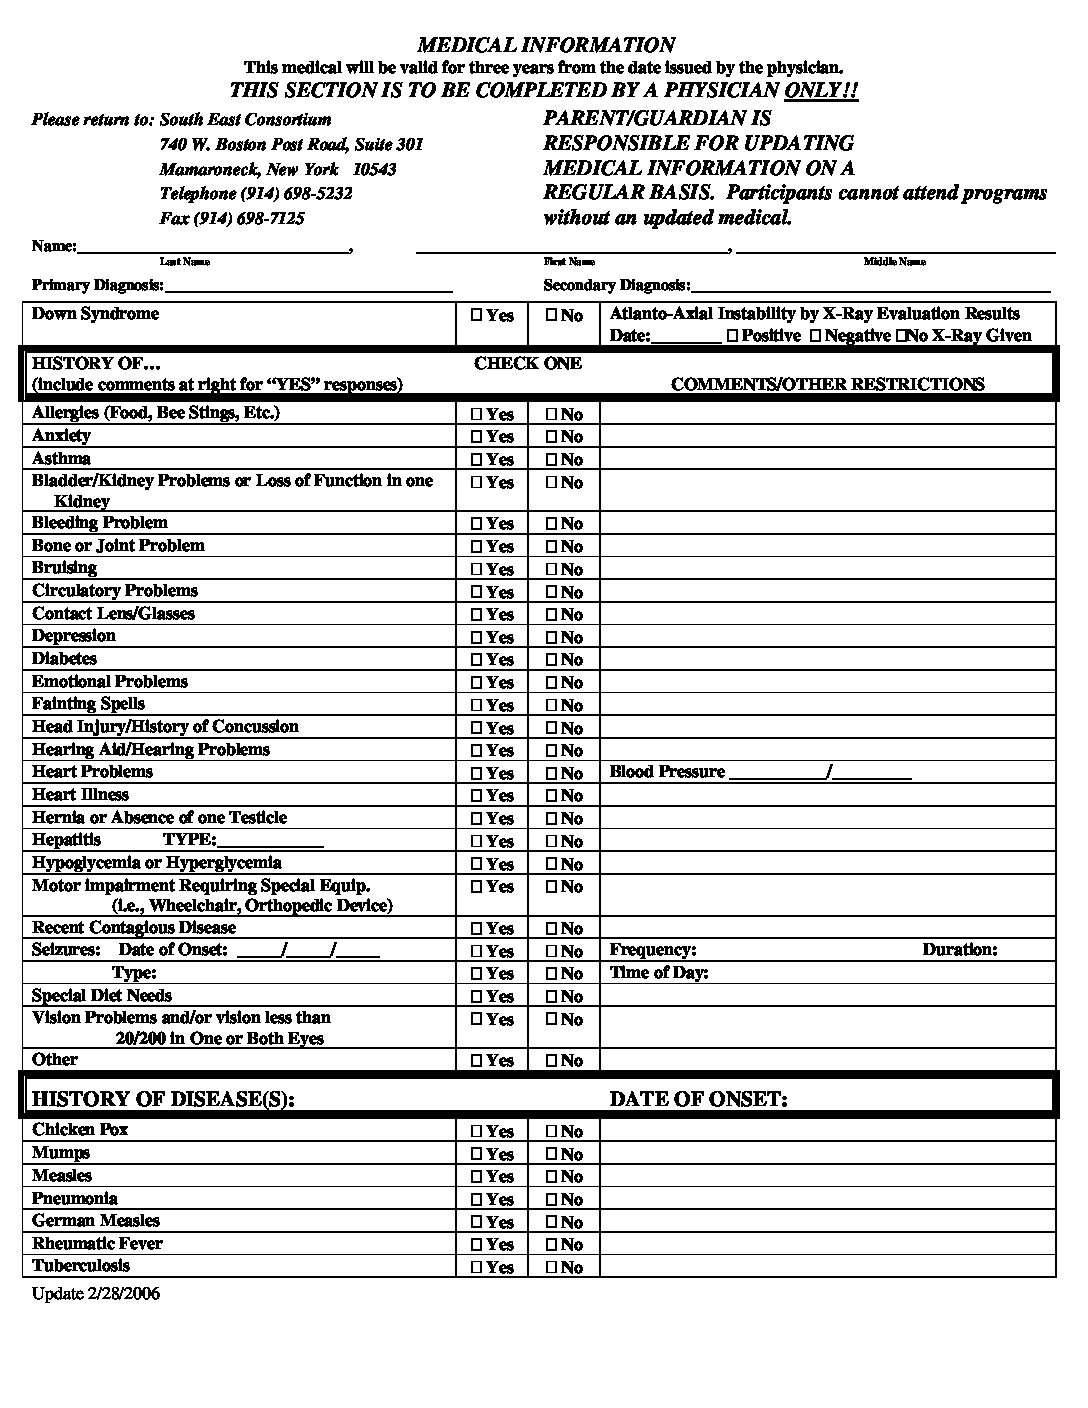 SEC Medical Form (must be filled out entirely and signed by doctor)